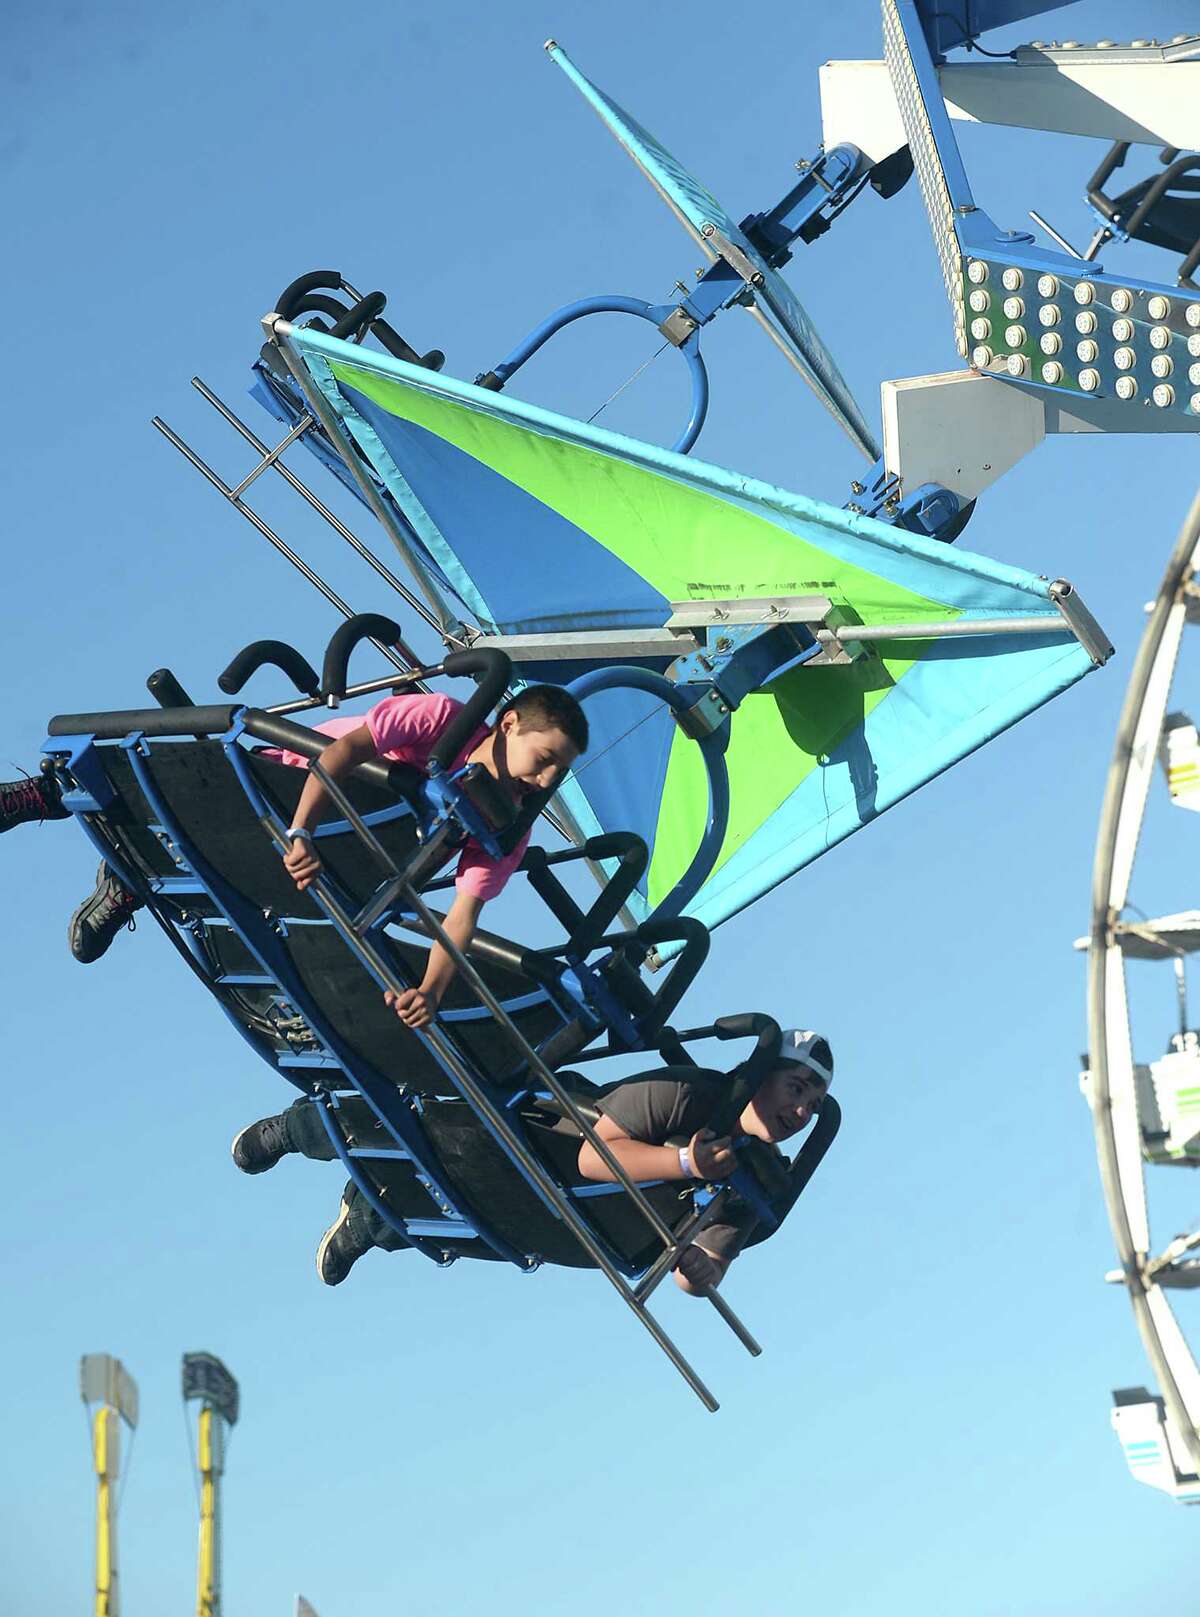 Fair goers get their thrills as they take in the many rides on the midway on the opening night of this year's South Texas State Fair at Ford Park. The YMBL of Beaumont hosted the traditional opening ceremony prior to admission, giving those in attendance free entry. Unlimited air runs ride wristbands were also available Thursday night. The fair runs daily through Sunday, April 9, and features a variety of activities for all ages. This weekend's highlights include the YMBL rodeo, which begins tonight at 7 p.m. For a complete listing of events and times, go to www.ymbl.org Photo taken Thursday, March 30, 2017 Kim Brent/The Enterprise